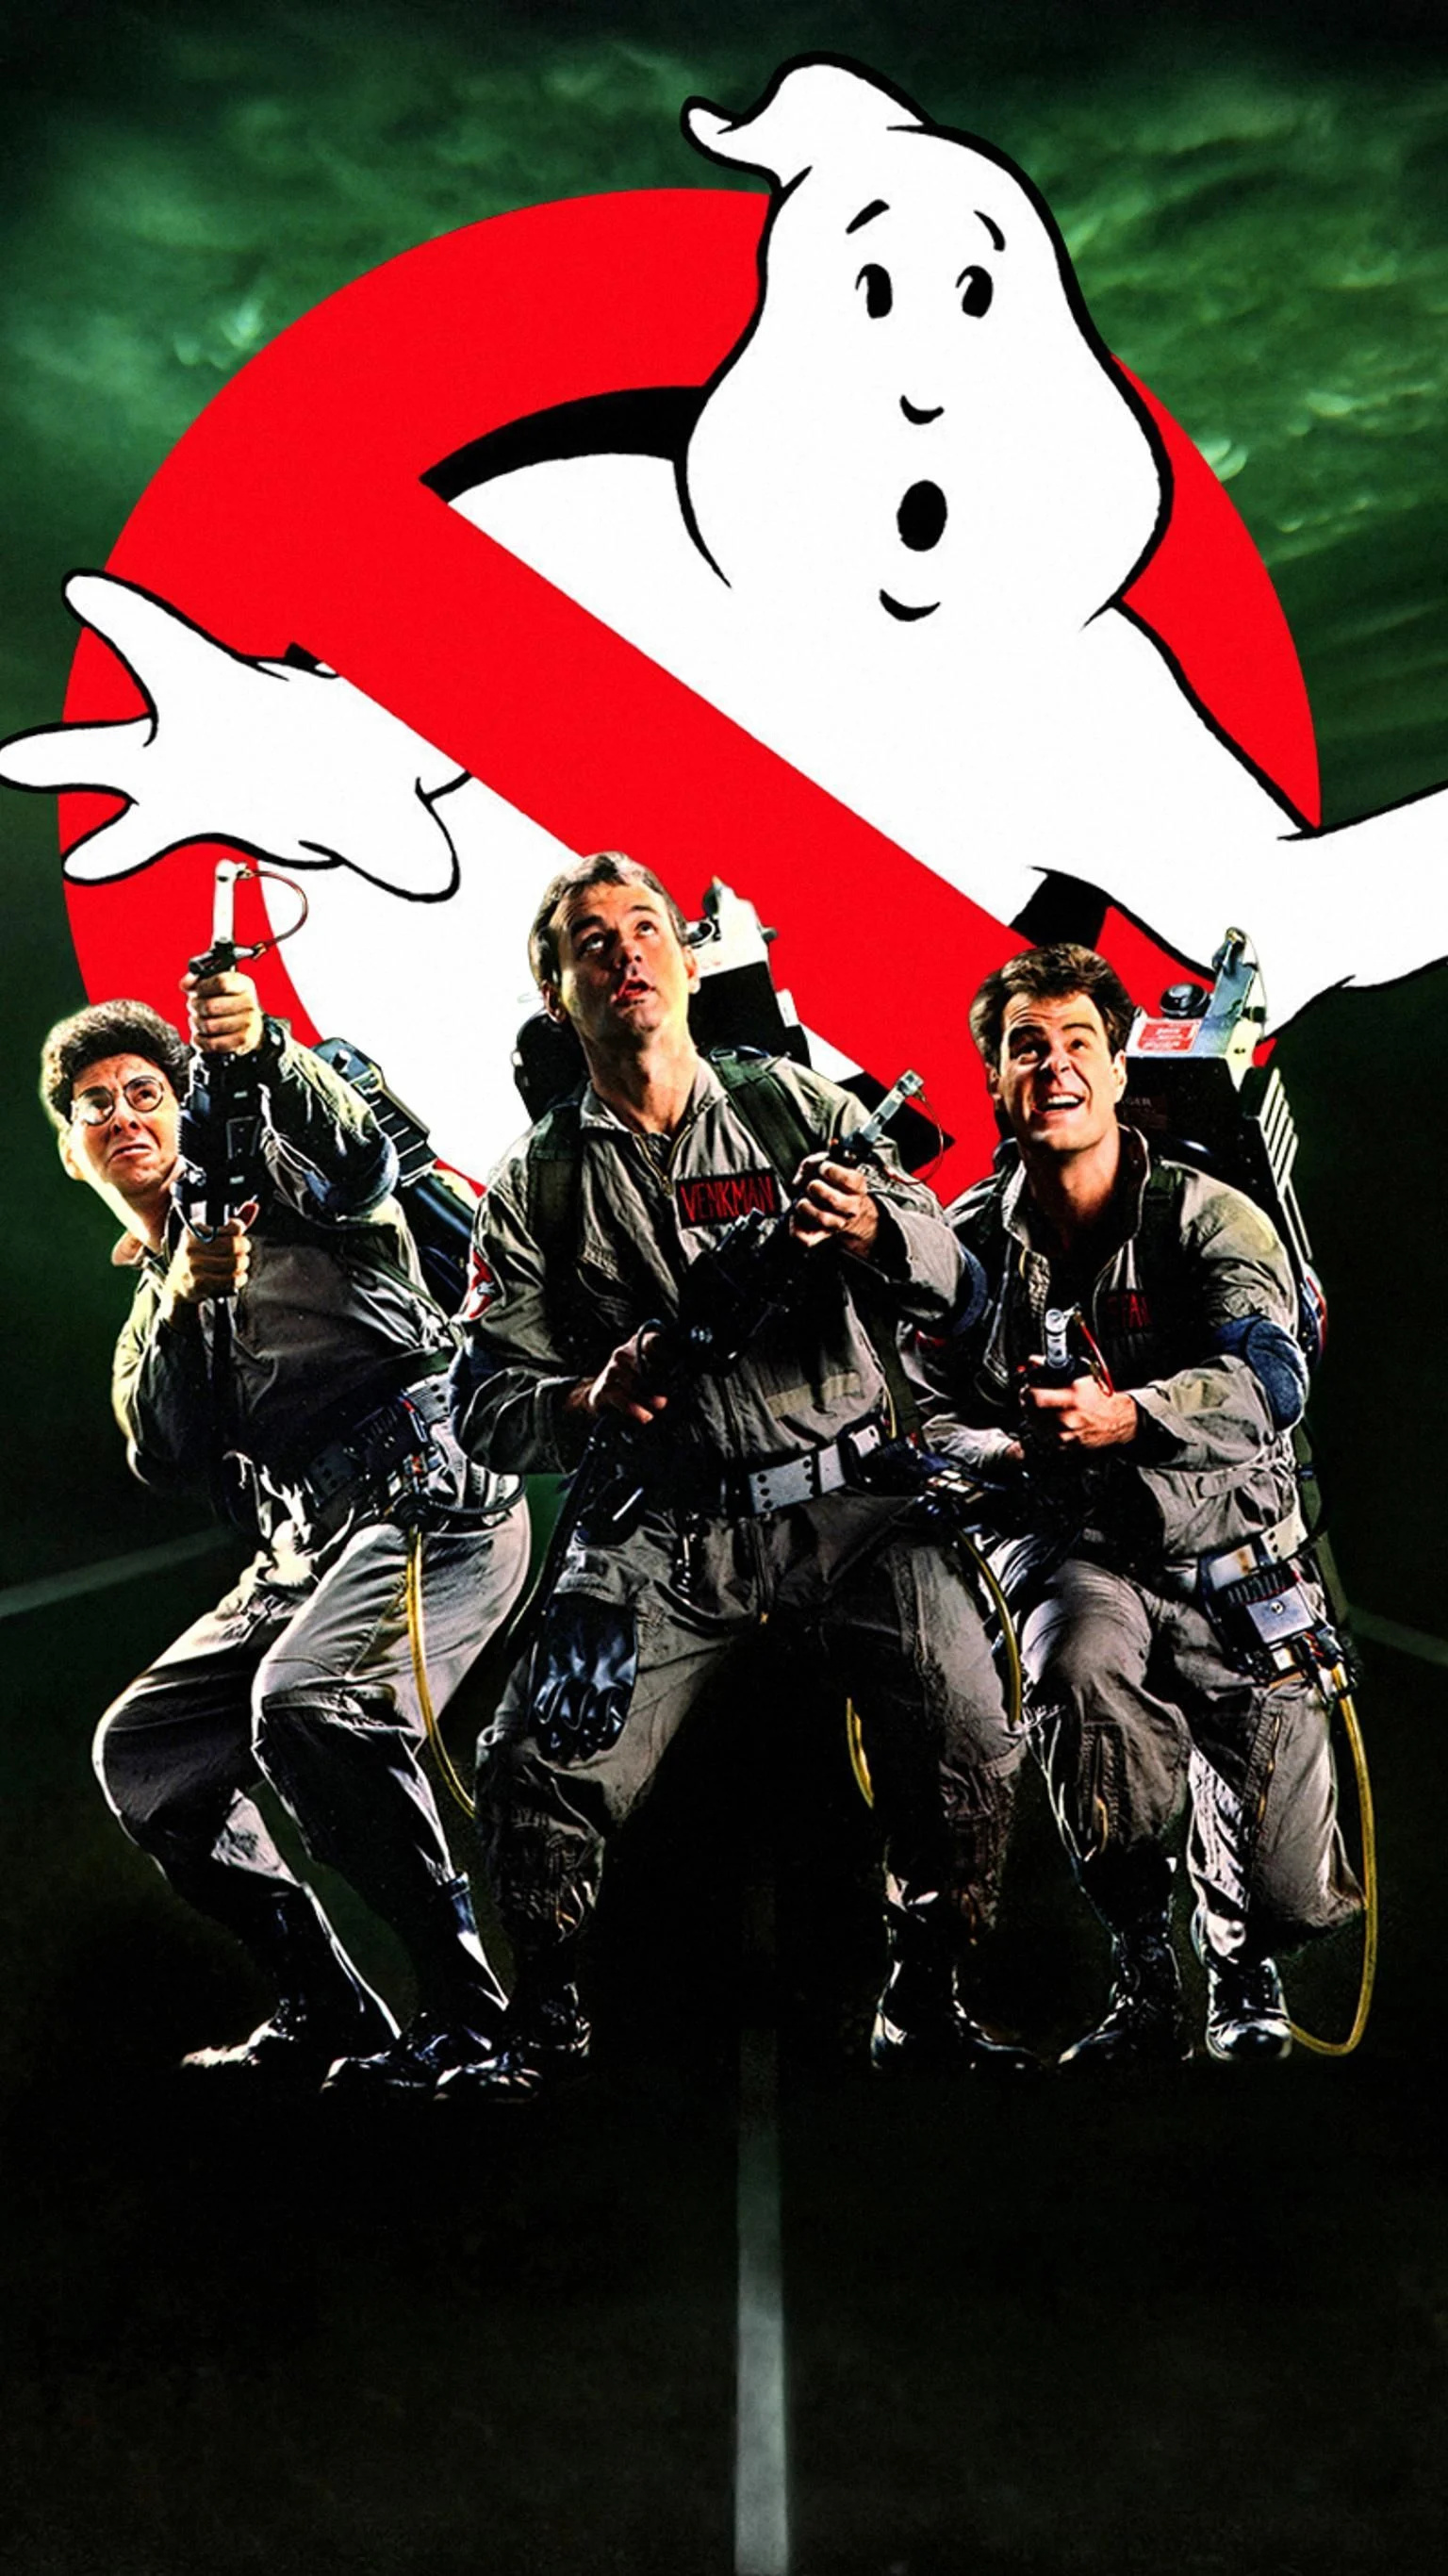 Ghostbusters: A 1984 American supernatural comedy film directed and produced by Ivan Reitman and written by Dan Aykroyd and Harold Ramis. 1540x2740 HD Background.